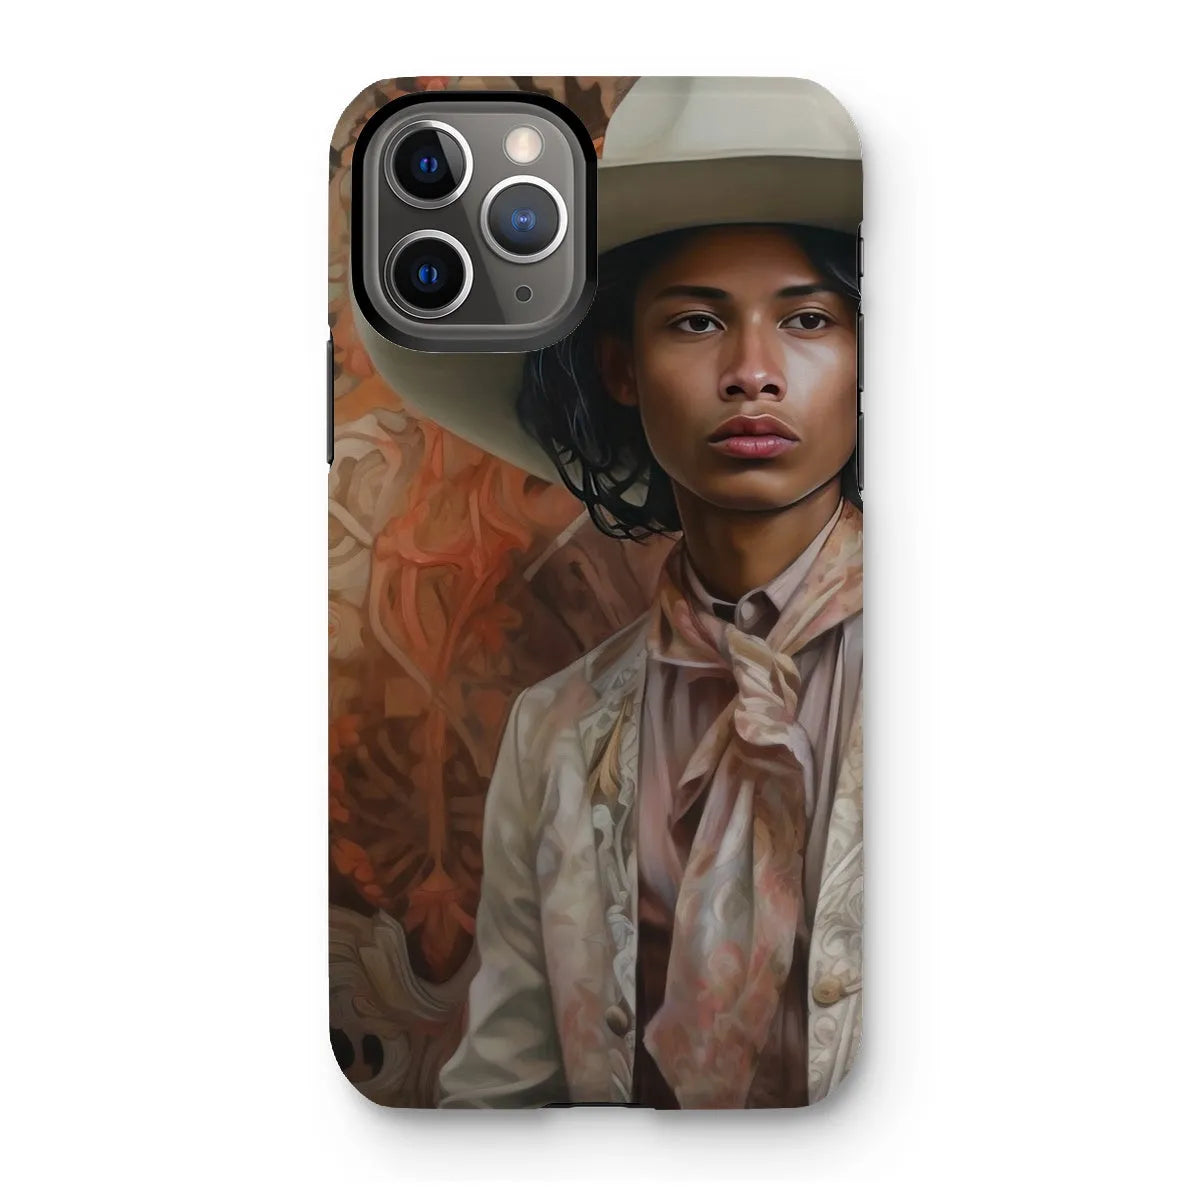 Arjuna The Gay Cowboy - Gay Aesthetic Art Phone Case - Iphone 11 Pro / Matte - Mobile Phone Cases - Aesthetic Art